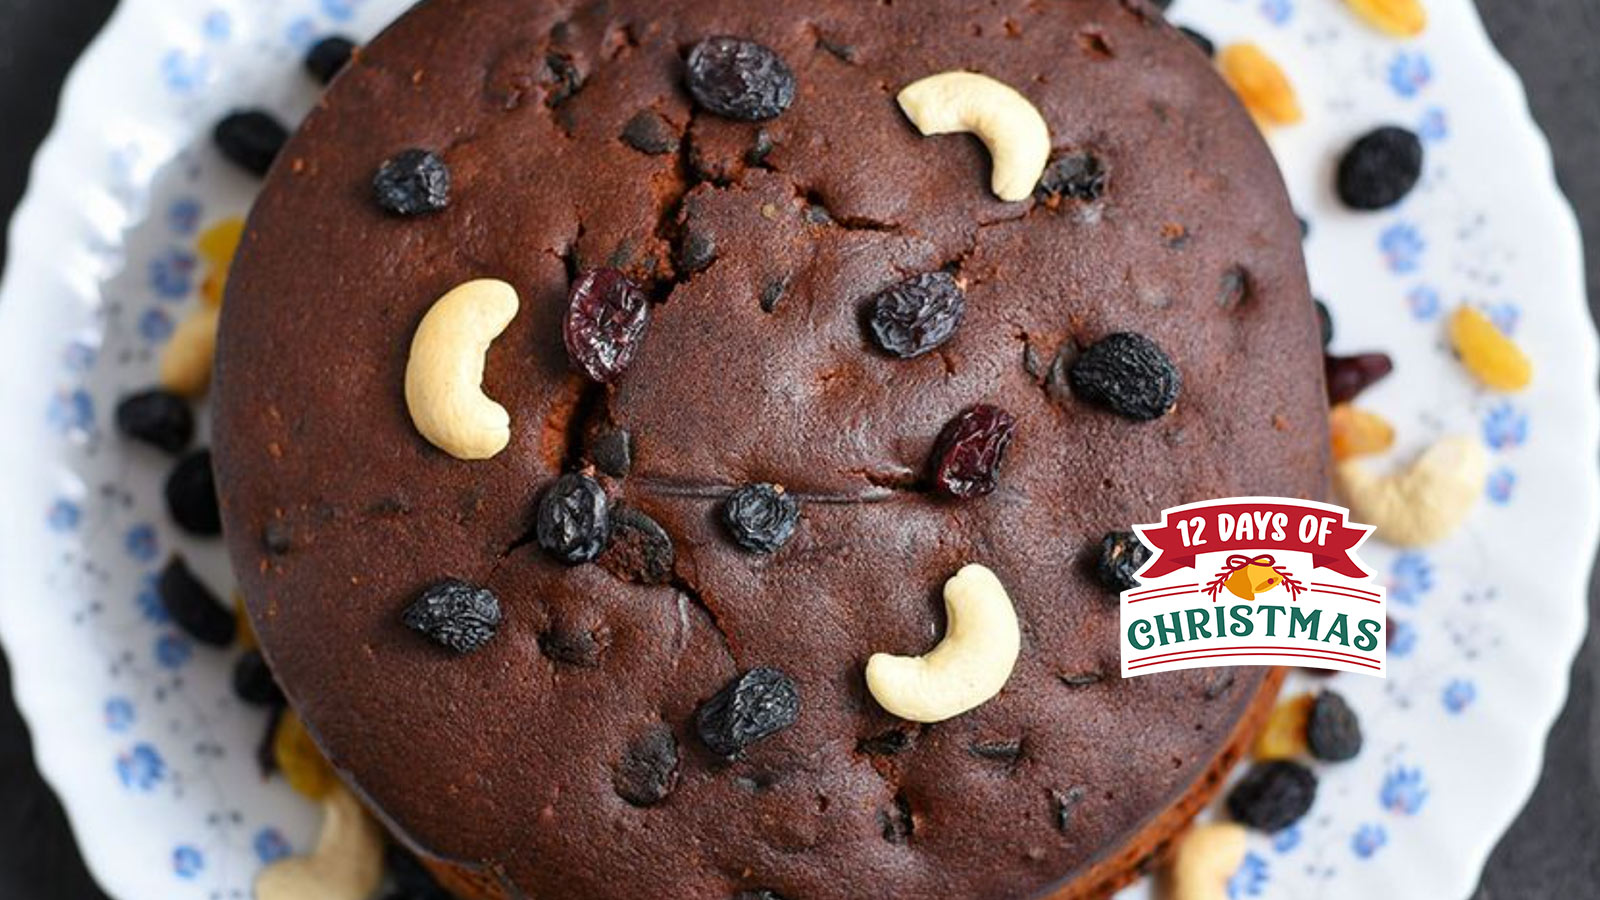 The yummiest Christmas cakes you can find in Mumbai and Pune | Times of  India Travel